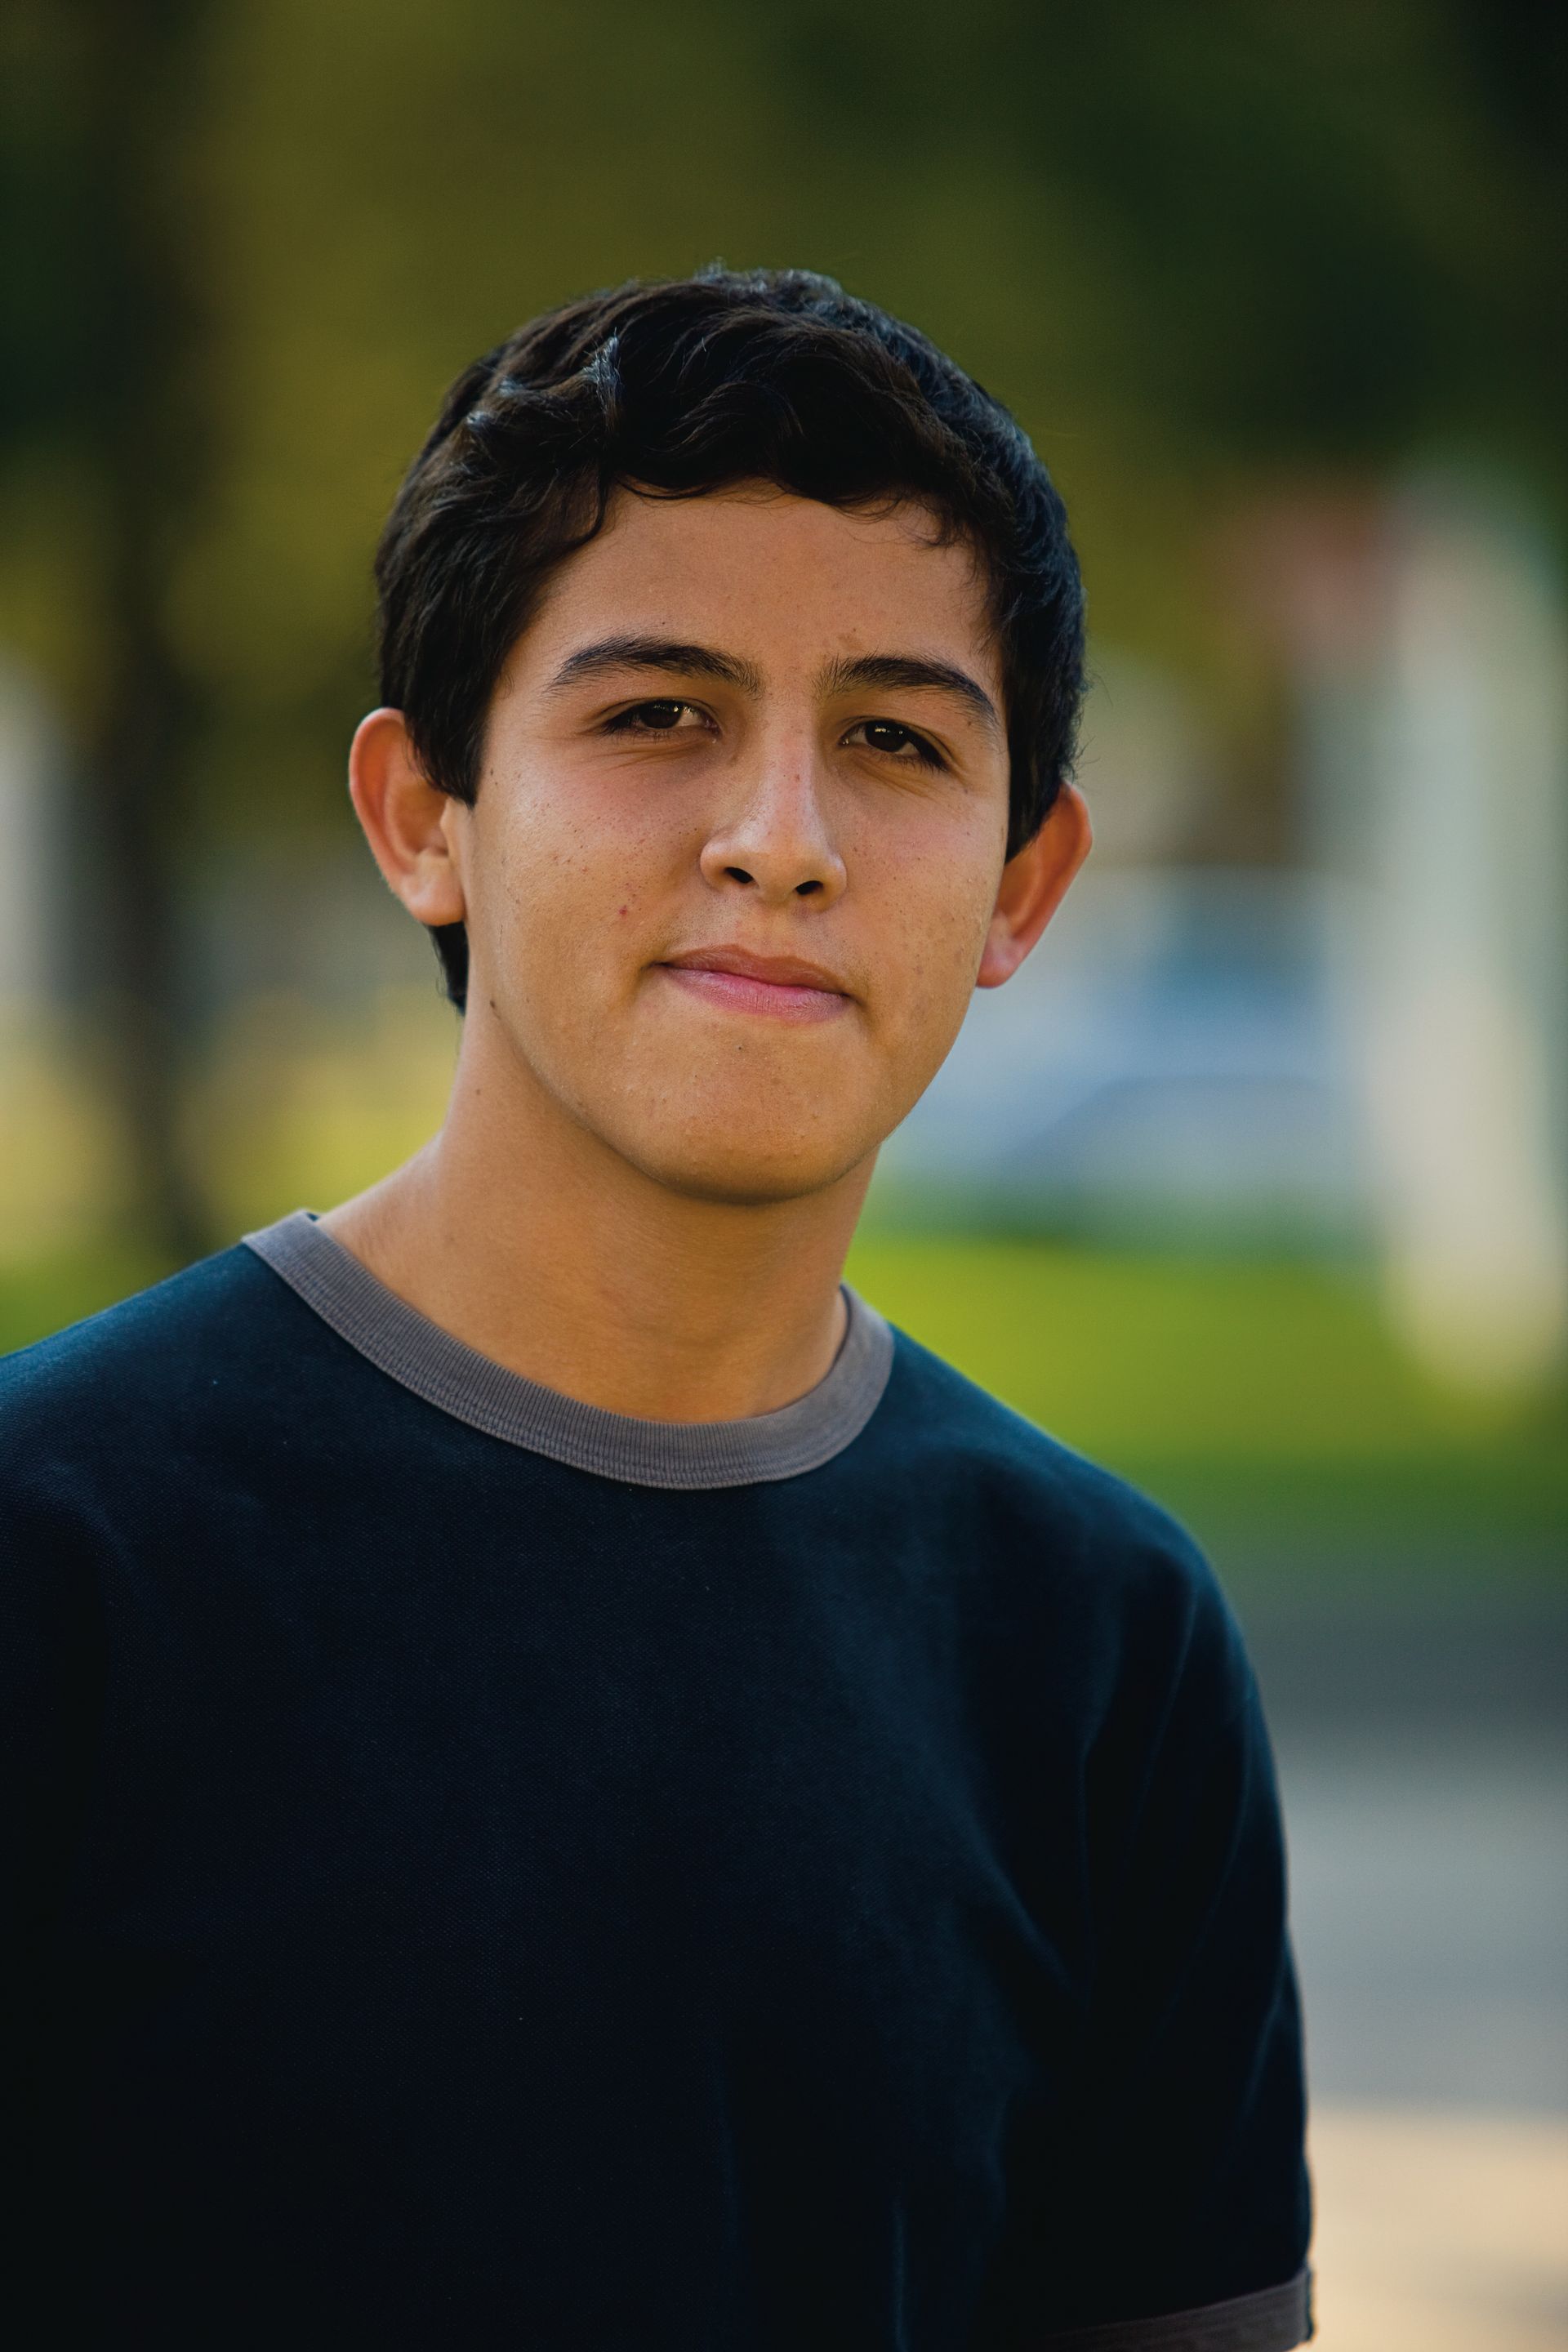 A portrait of a young man in Mexico.